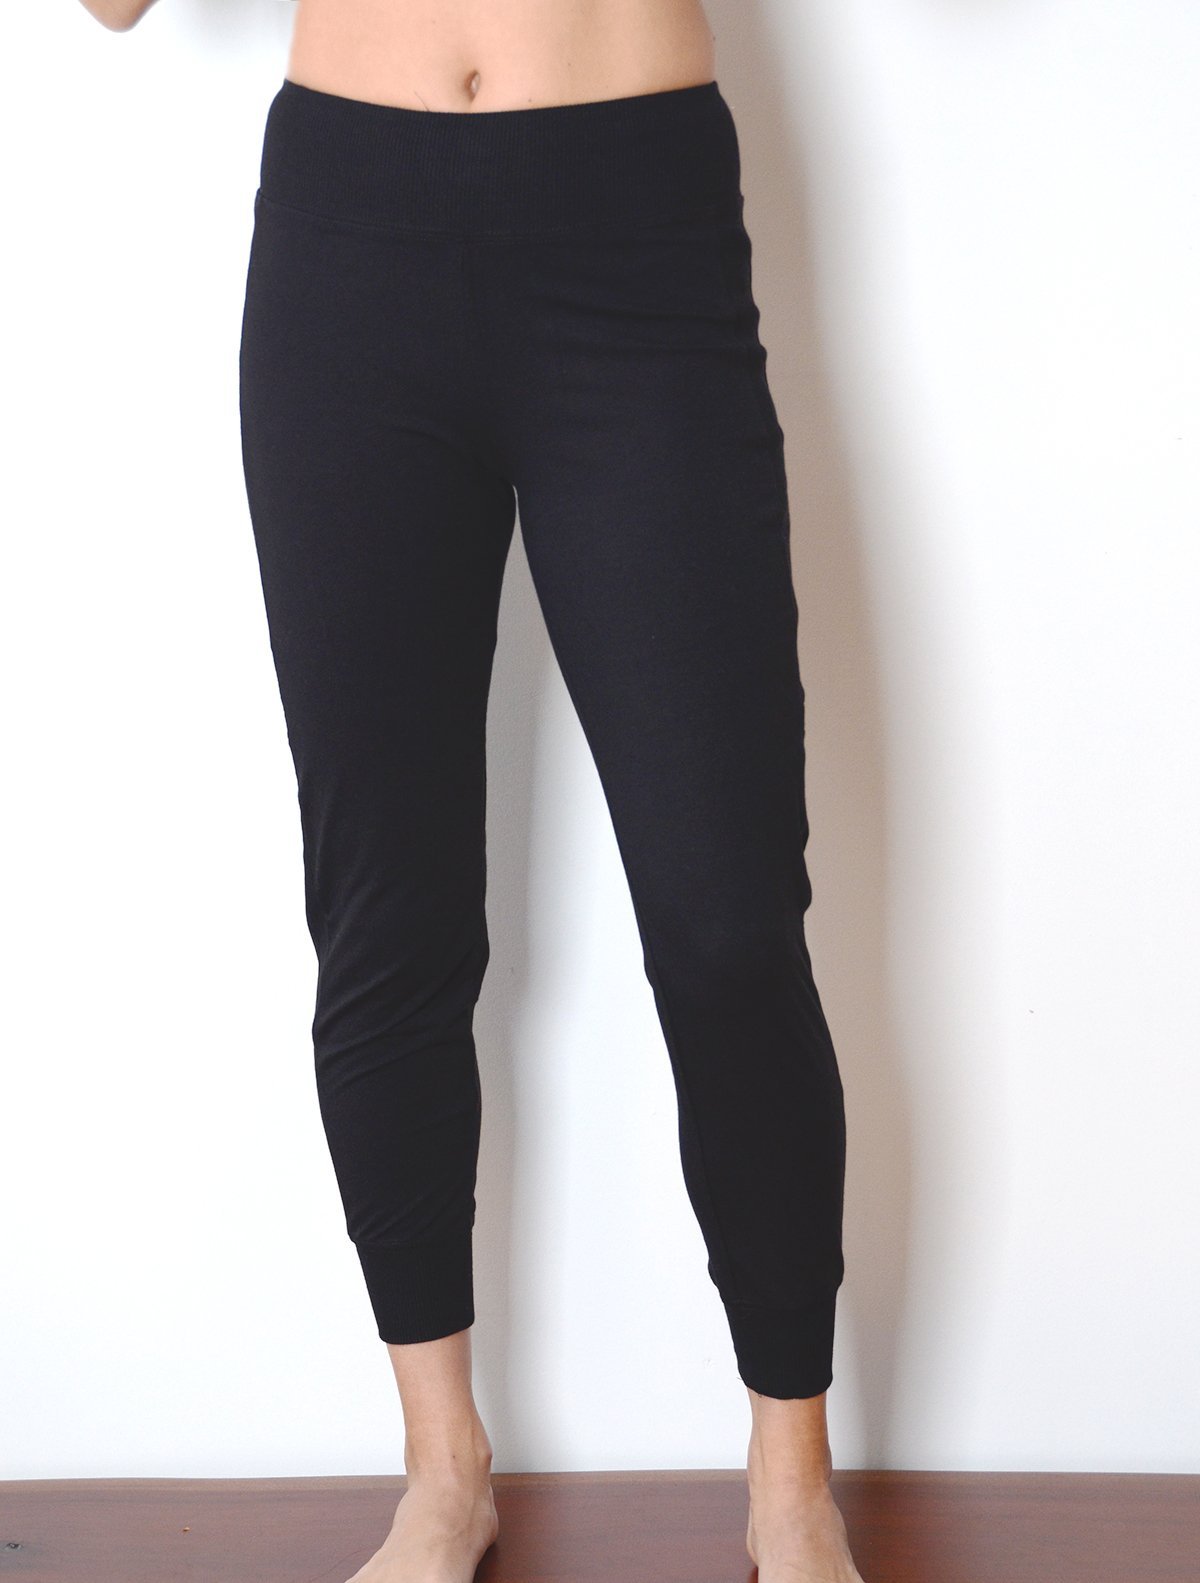 front view of model wearing simulacra's women's black cropped joggers with bare stomach to show the high rise shape